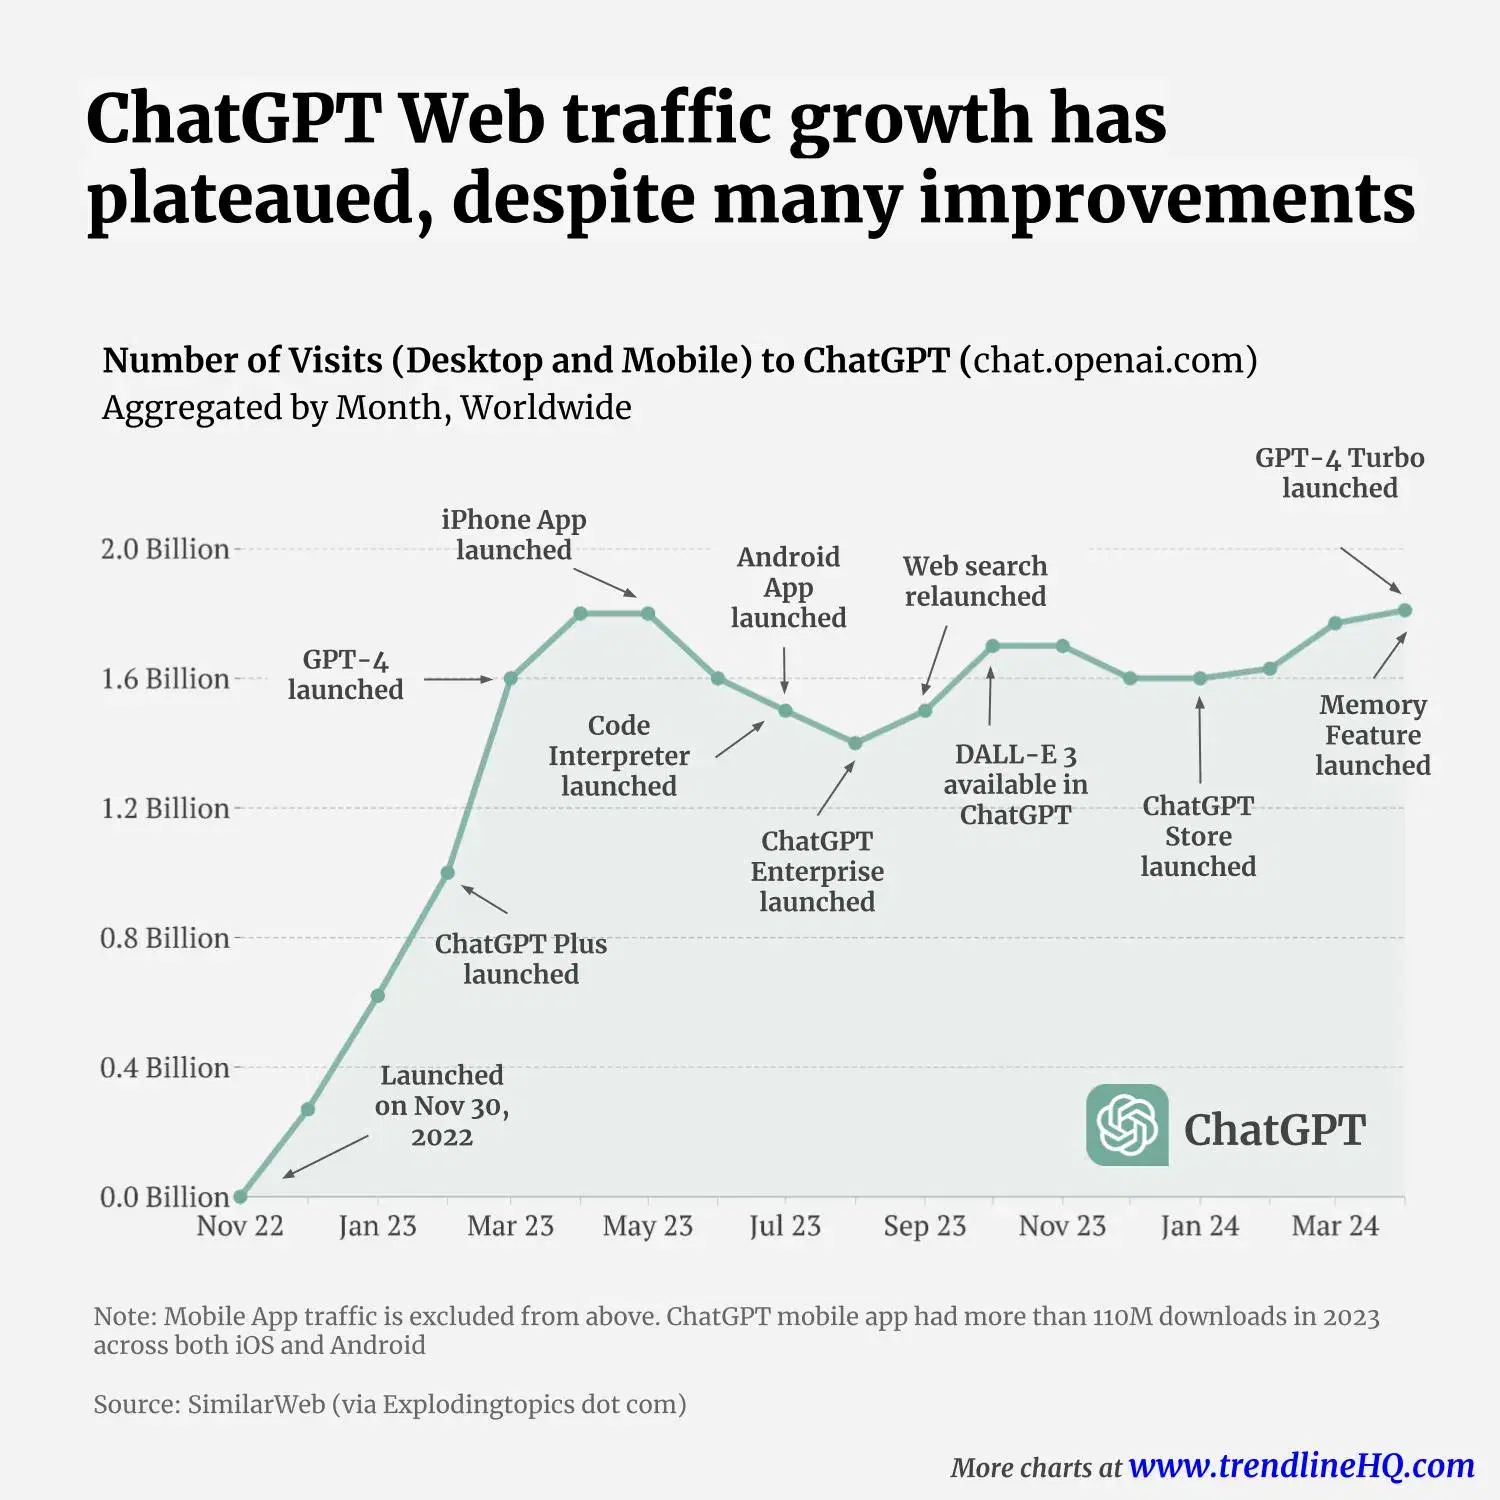 ChatGPT Web traffic growth has plateaued